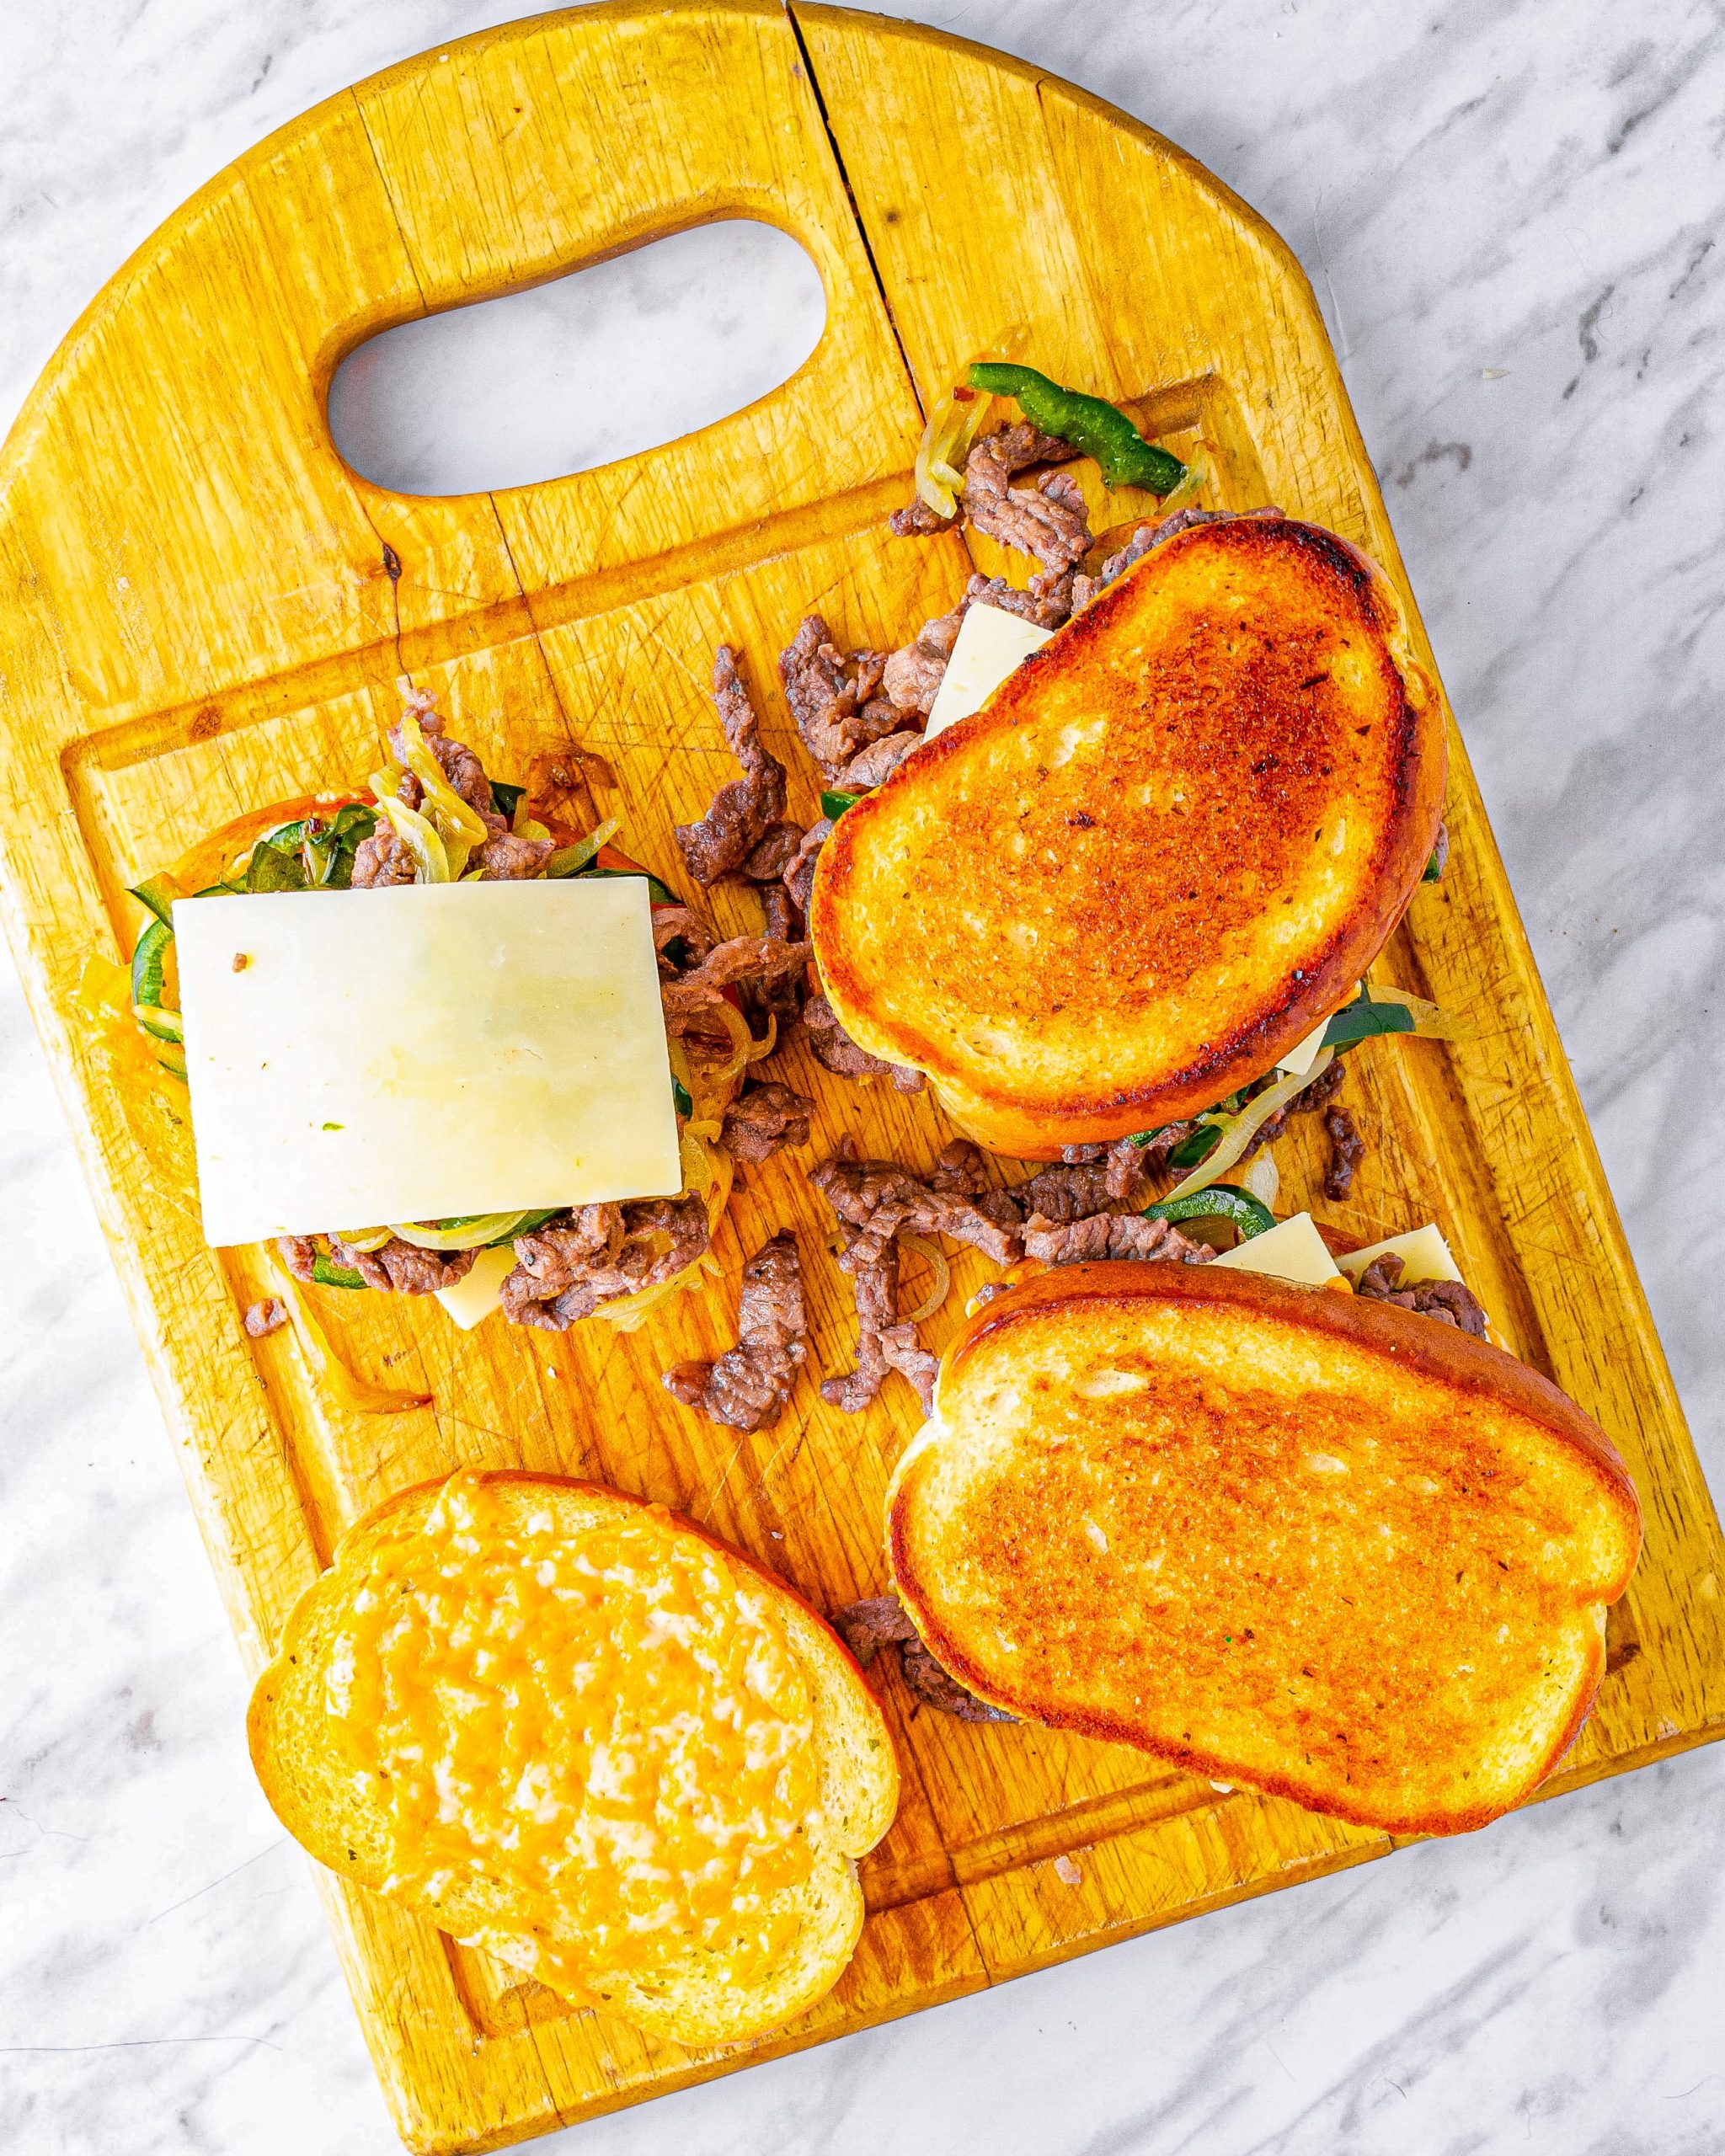 Top each sandwich with a slice of mozzarella cheese and another slice of garlic cheese toast on top.